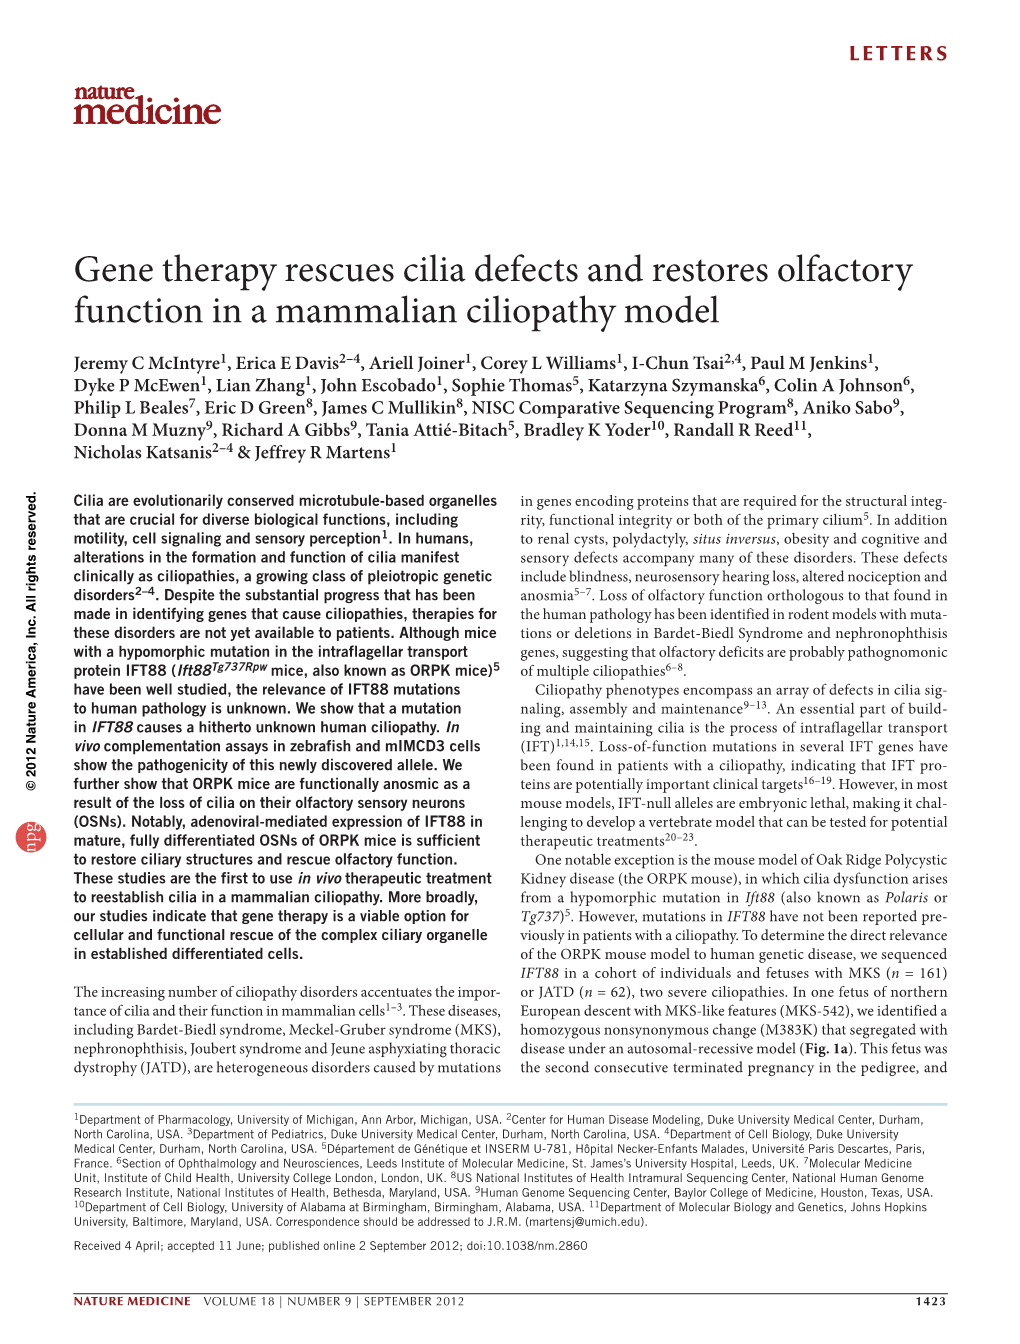 Gene Therapy Rescues Cilia Defects and Restores Olfactory Function in a Mammalian Ciliopathy Model